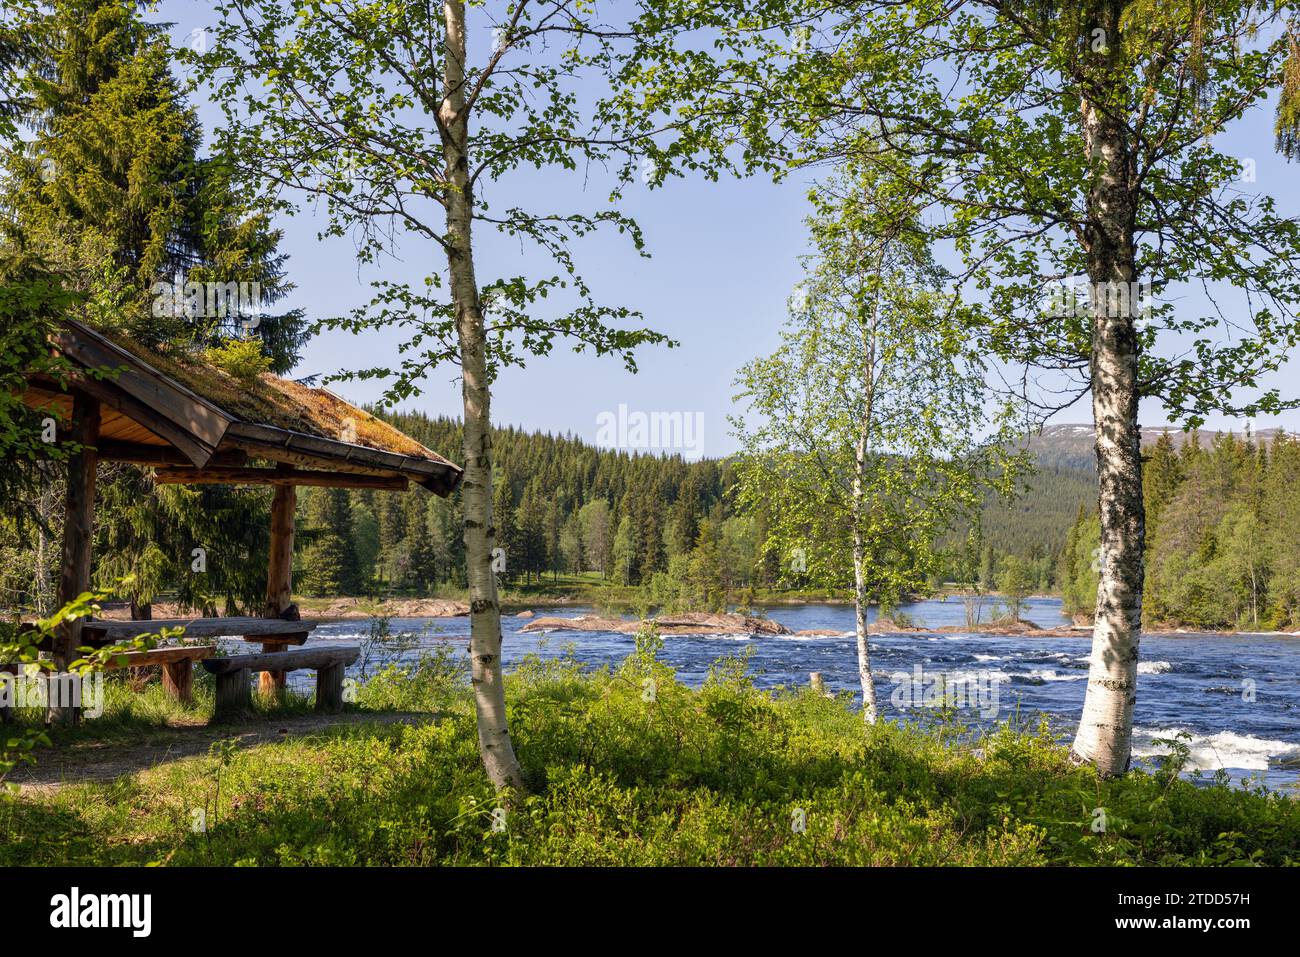 A picnic spot by the Namsen River, Norway, with a mossy-roofed shelter and wooden benches, offering a view of flowing waters amid the lush Trondelag Stock Photo